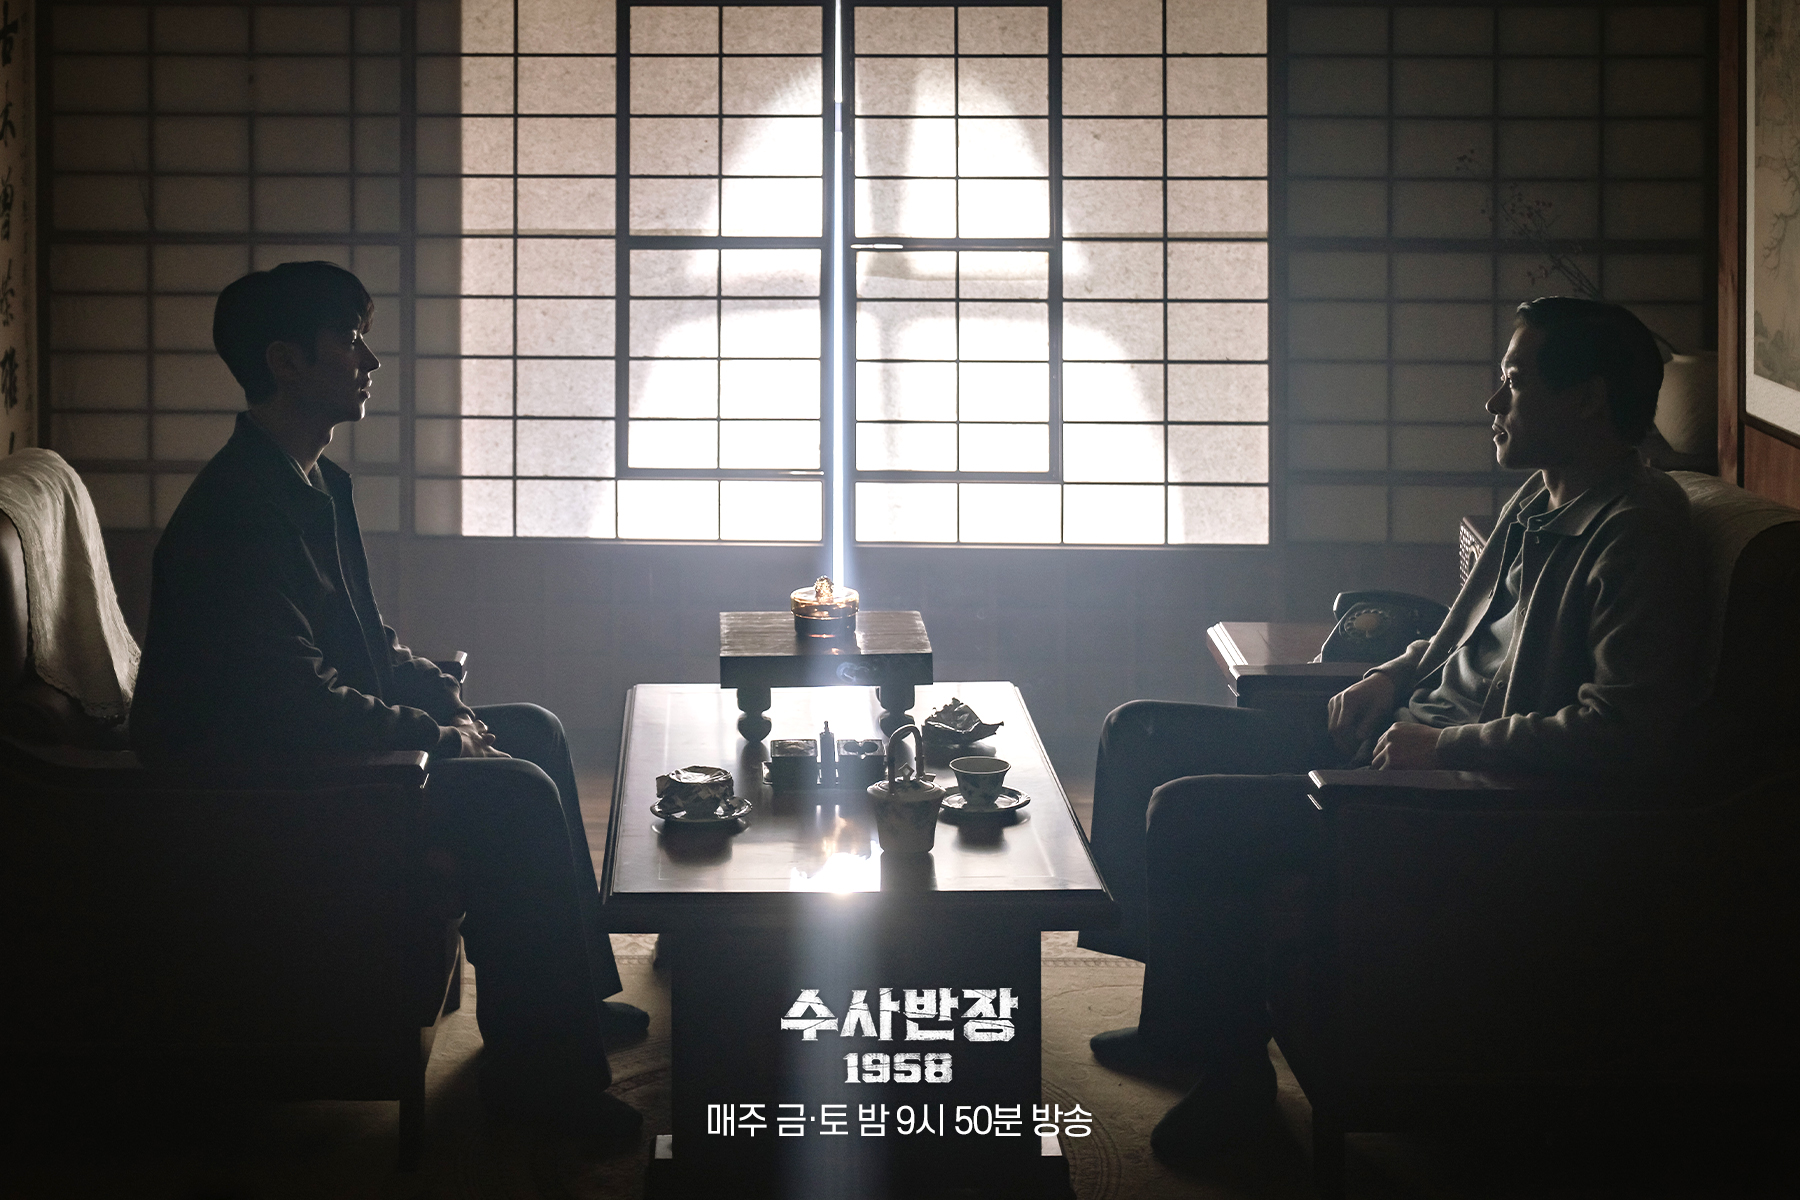 Lee Je Hoon And Kim Yeong Seong Have A Tense First Meeting In 